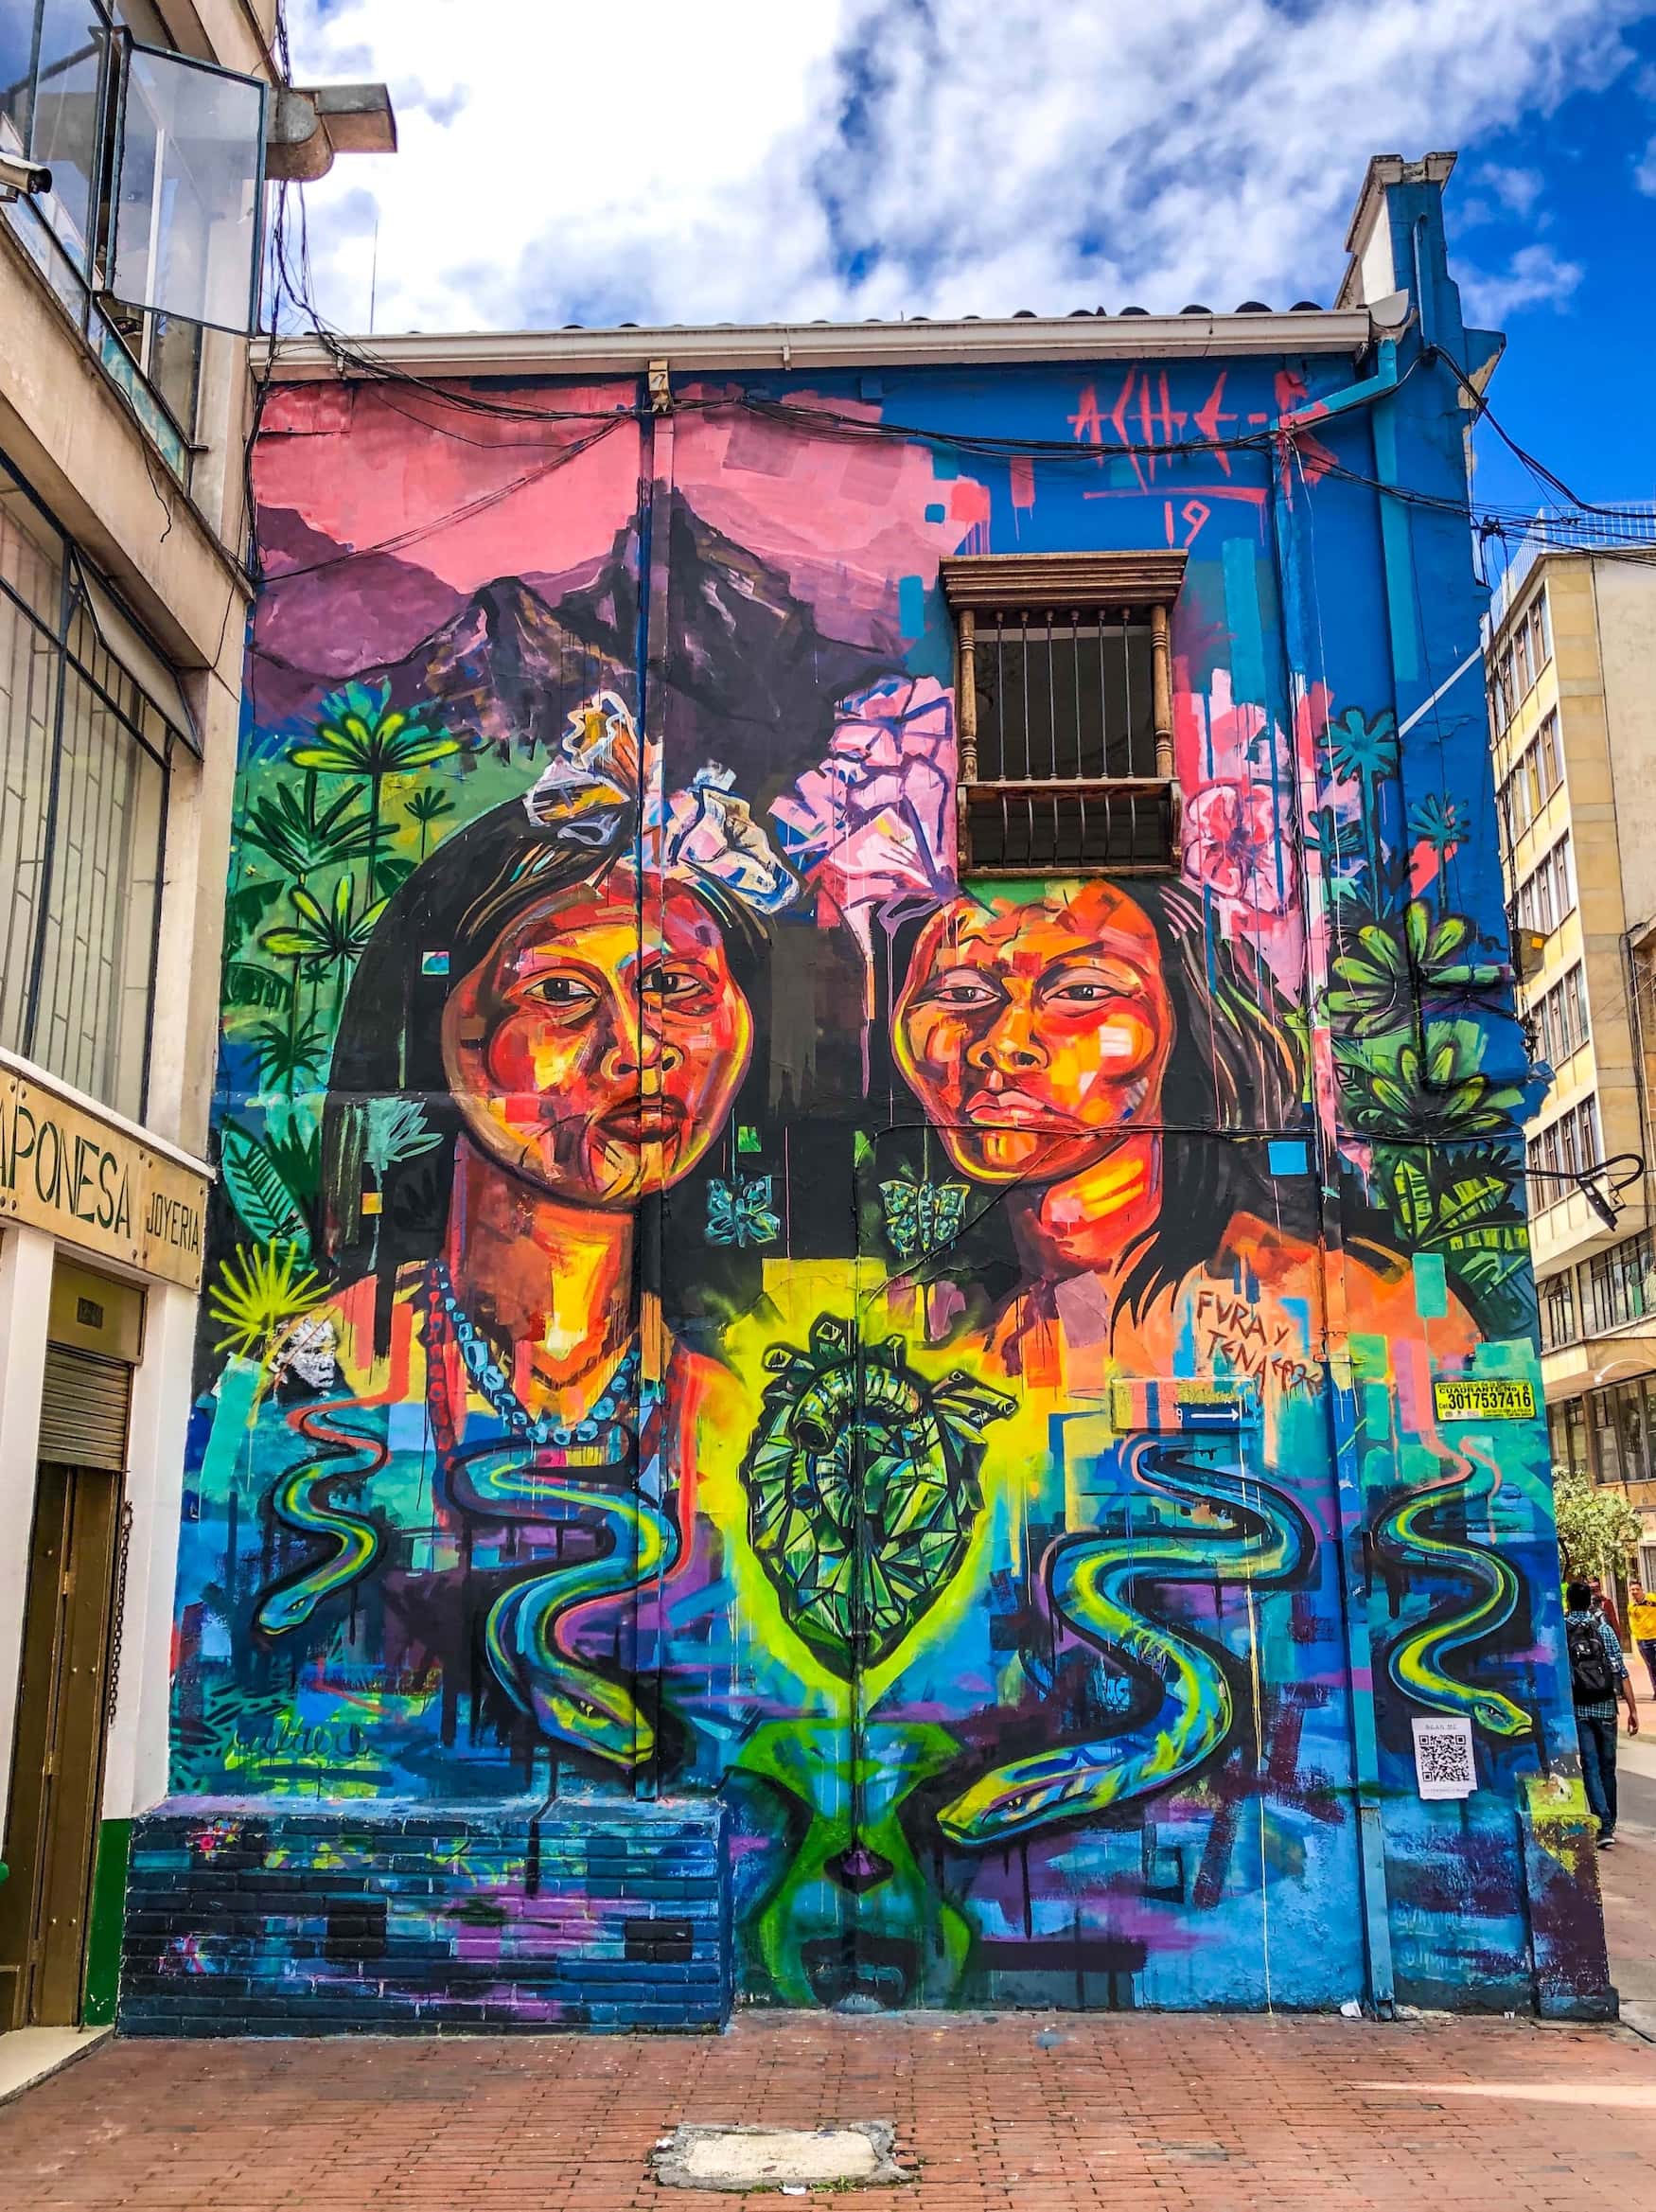 Colorful street art in Bogotá, one of the best cities in the world for street art